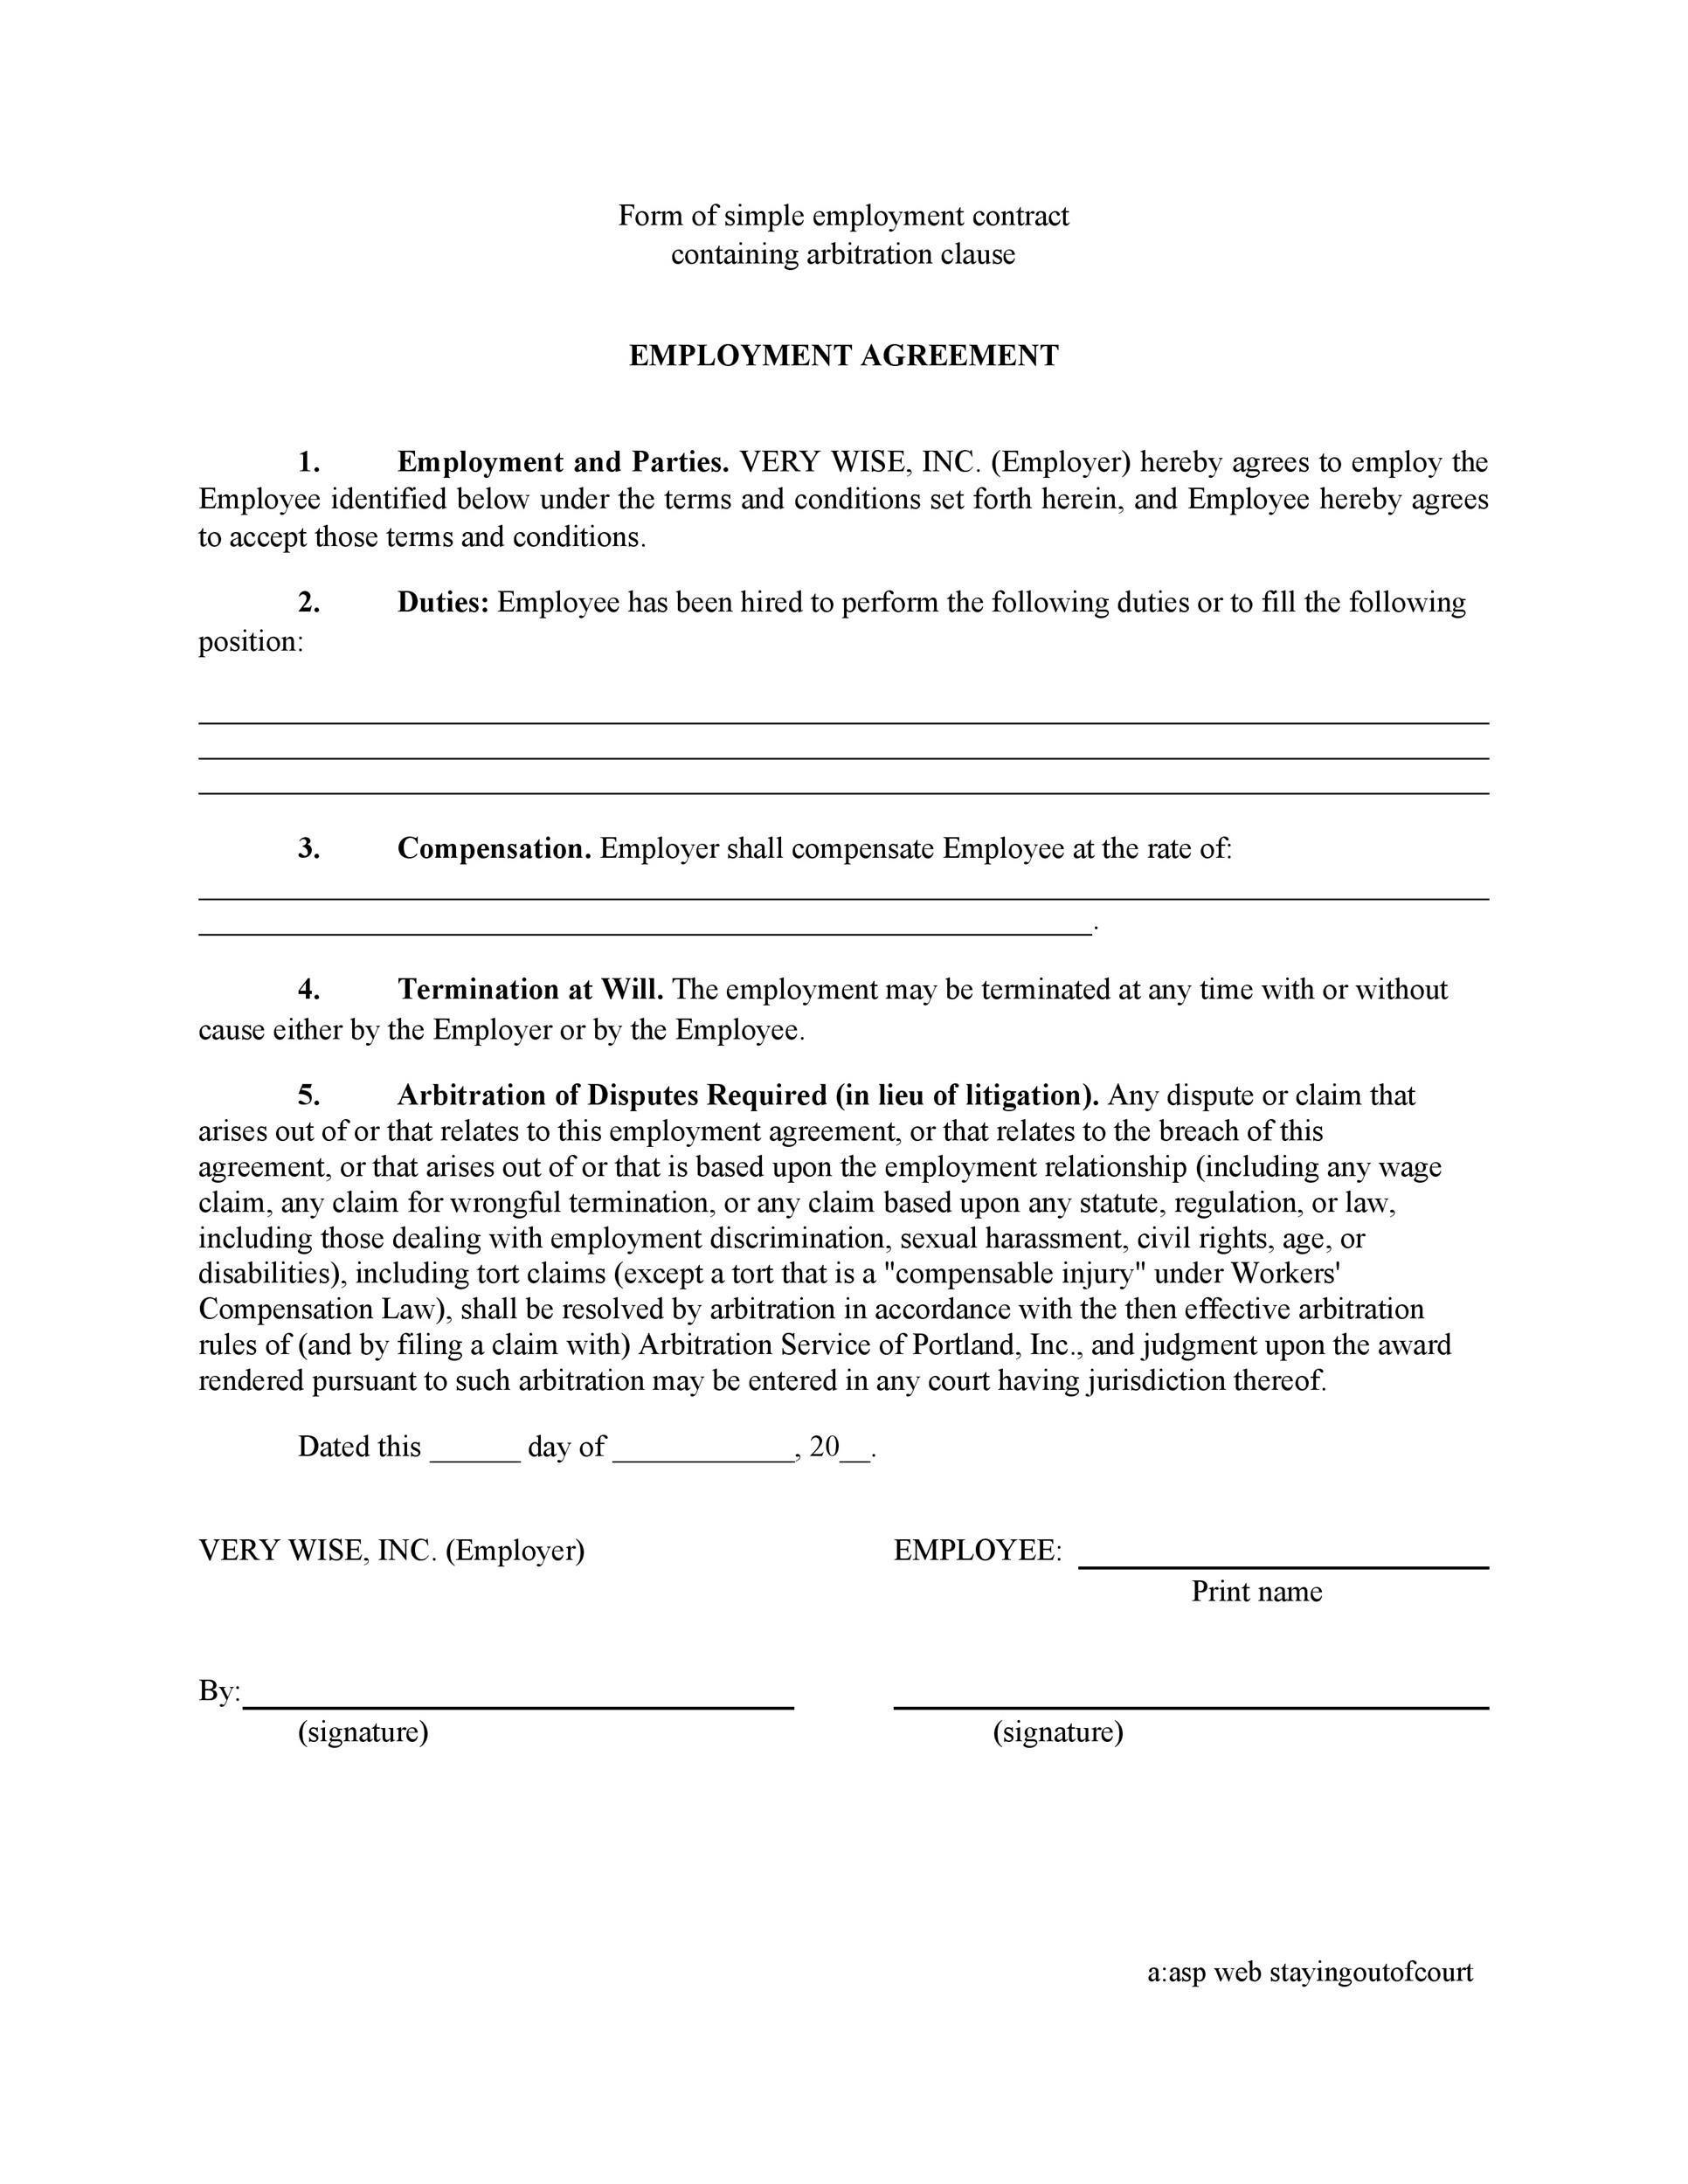 employment-contract-template-contract-of-employment-entered-into